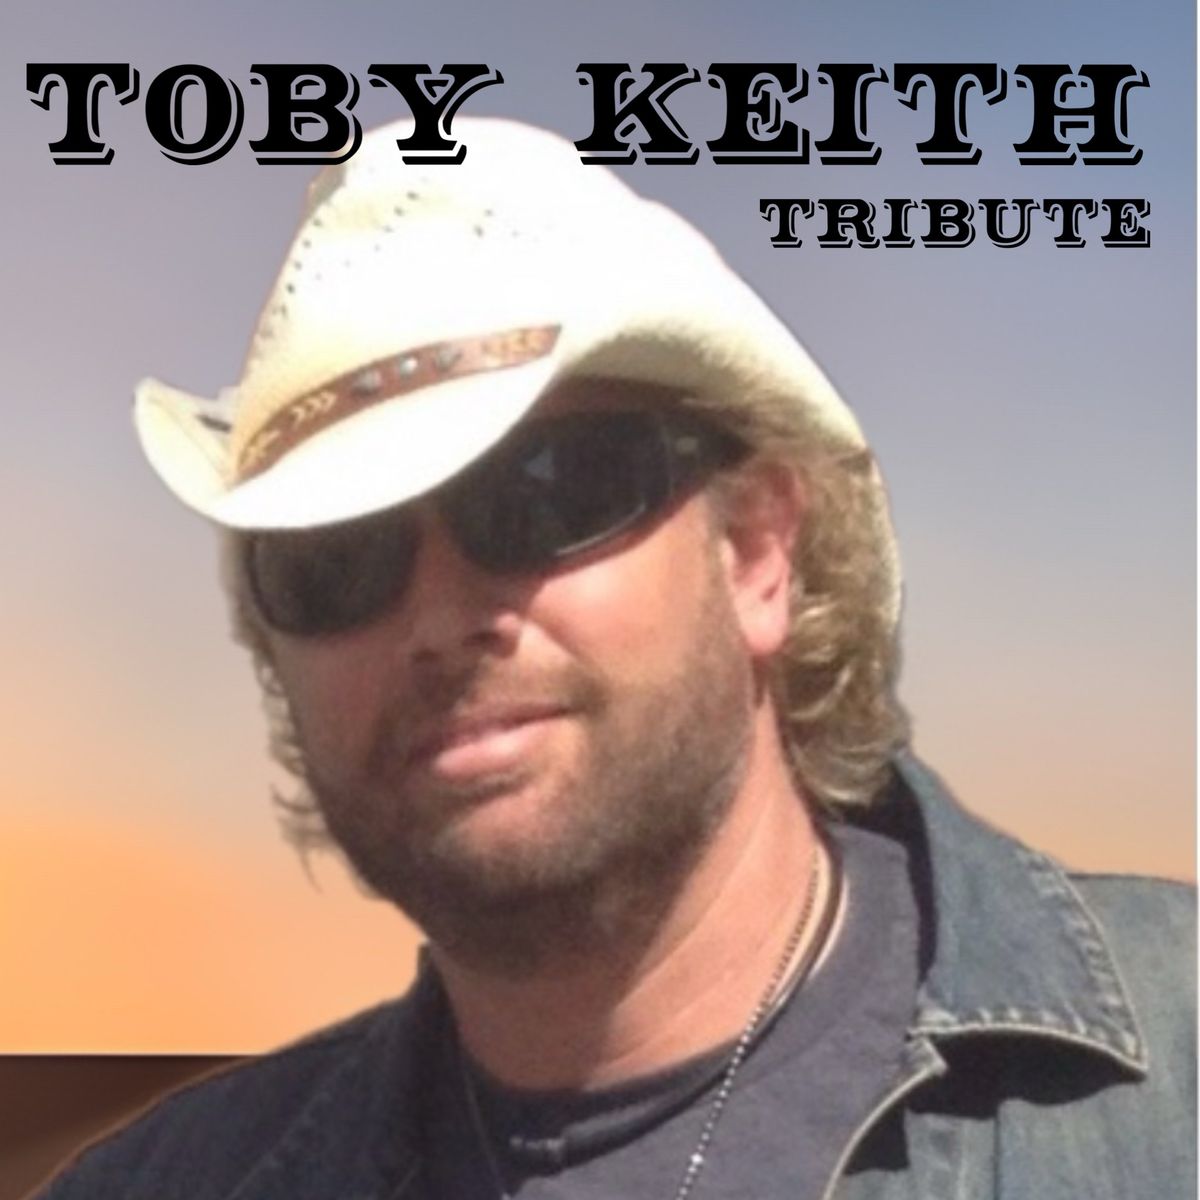 The American Ride- Toby Keith tribute @ Uptown! Knauer Performing Arts Center